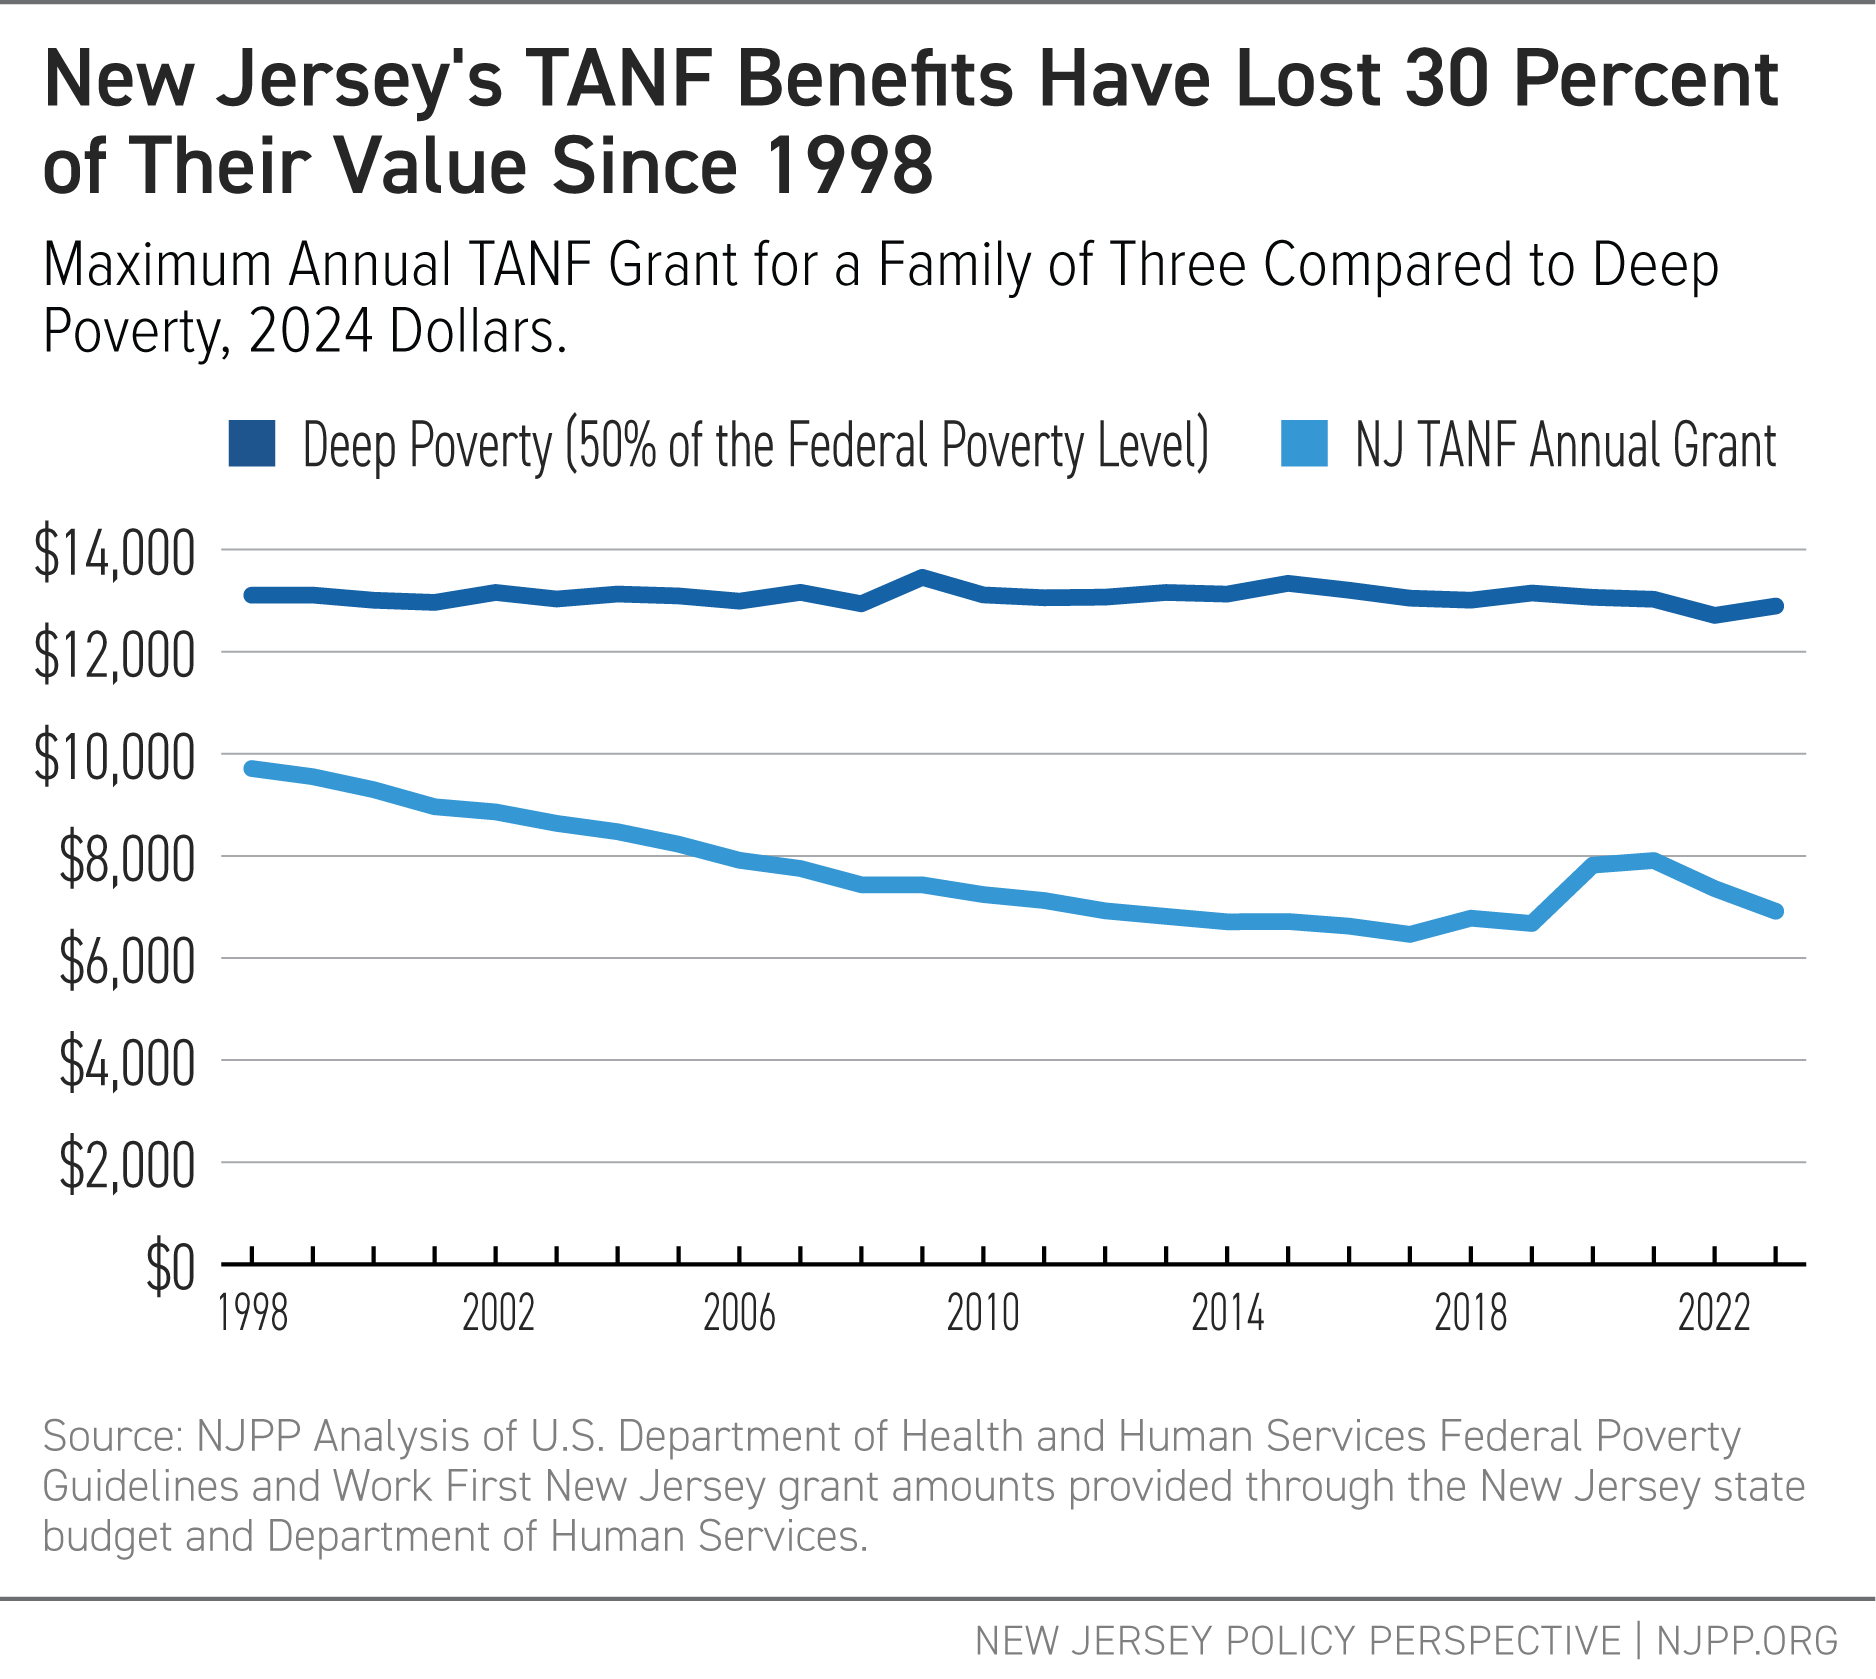 New Jersey's TANF Benefits Have Lost 30 Percent of Their Value Since 1998